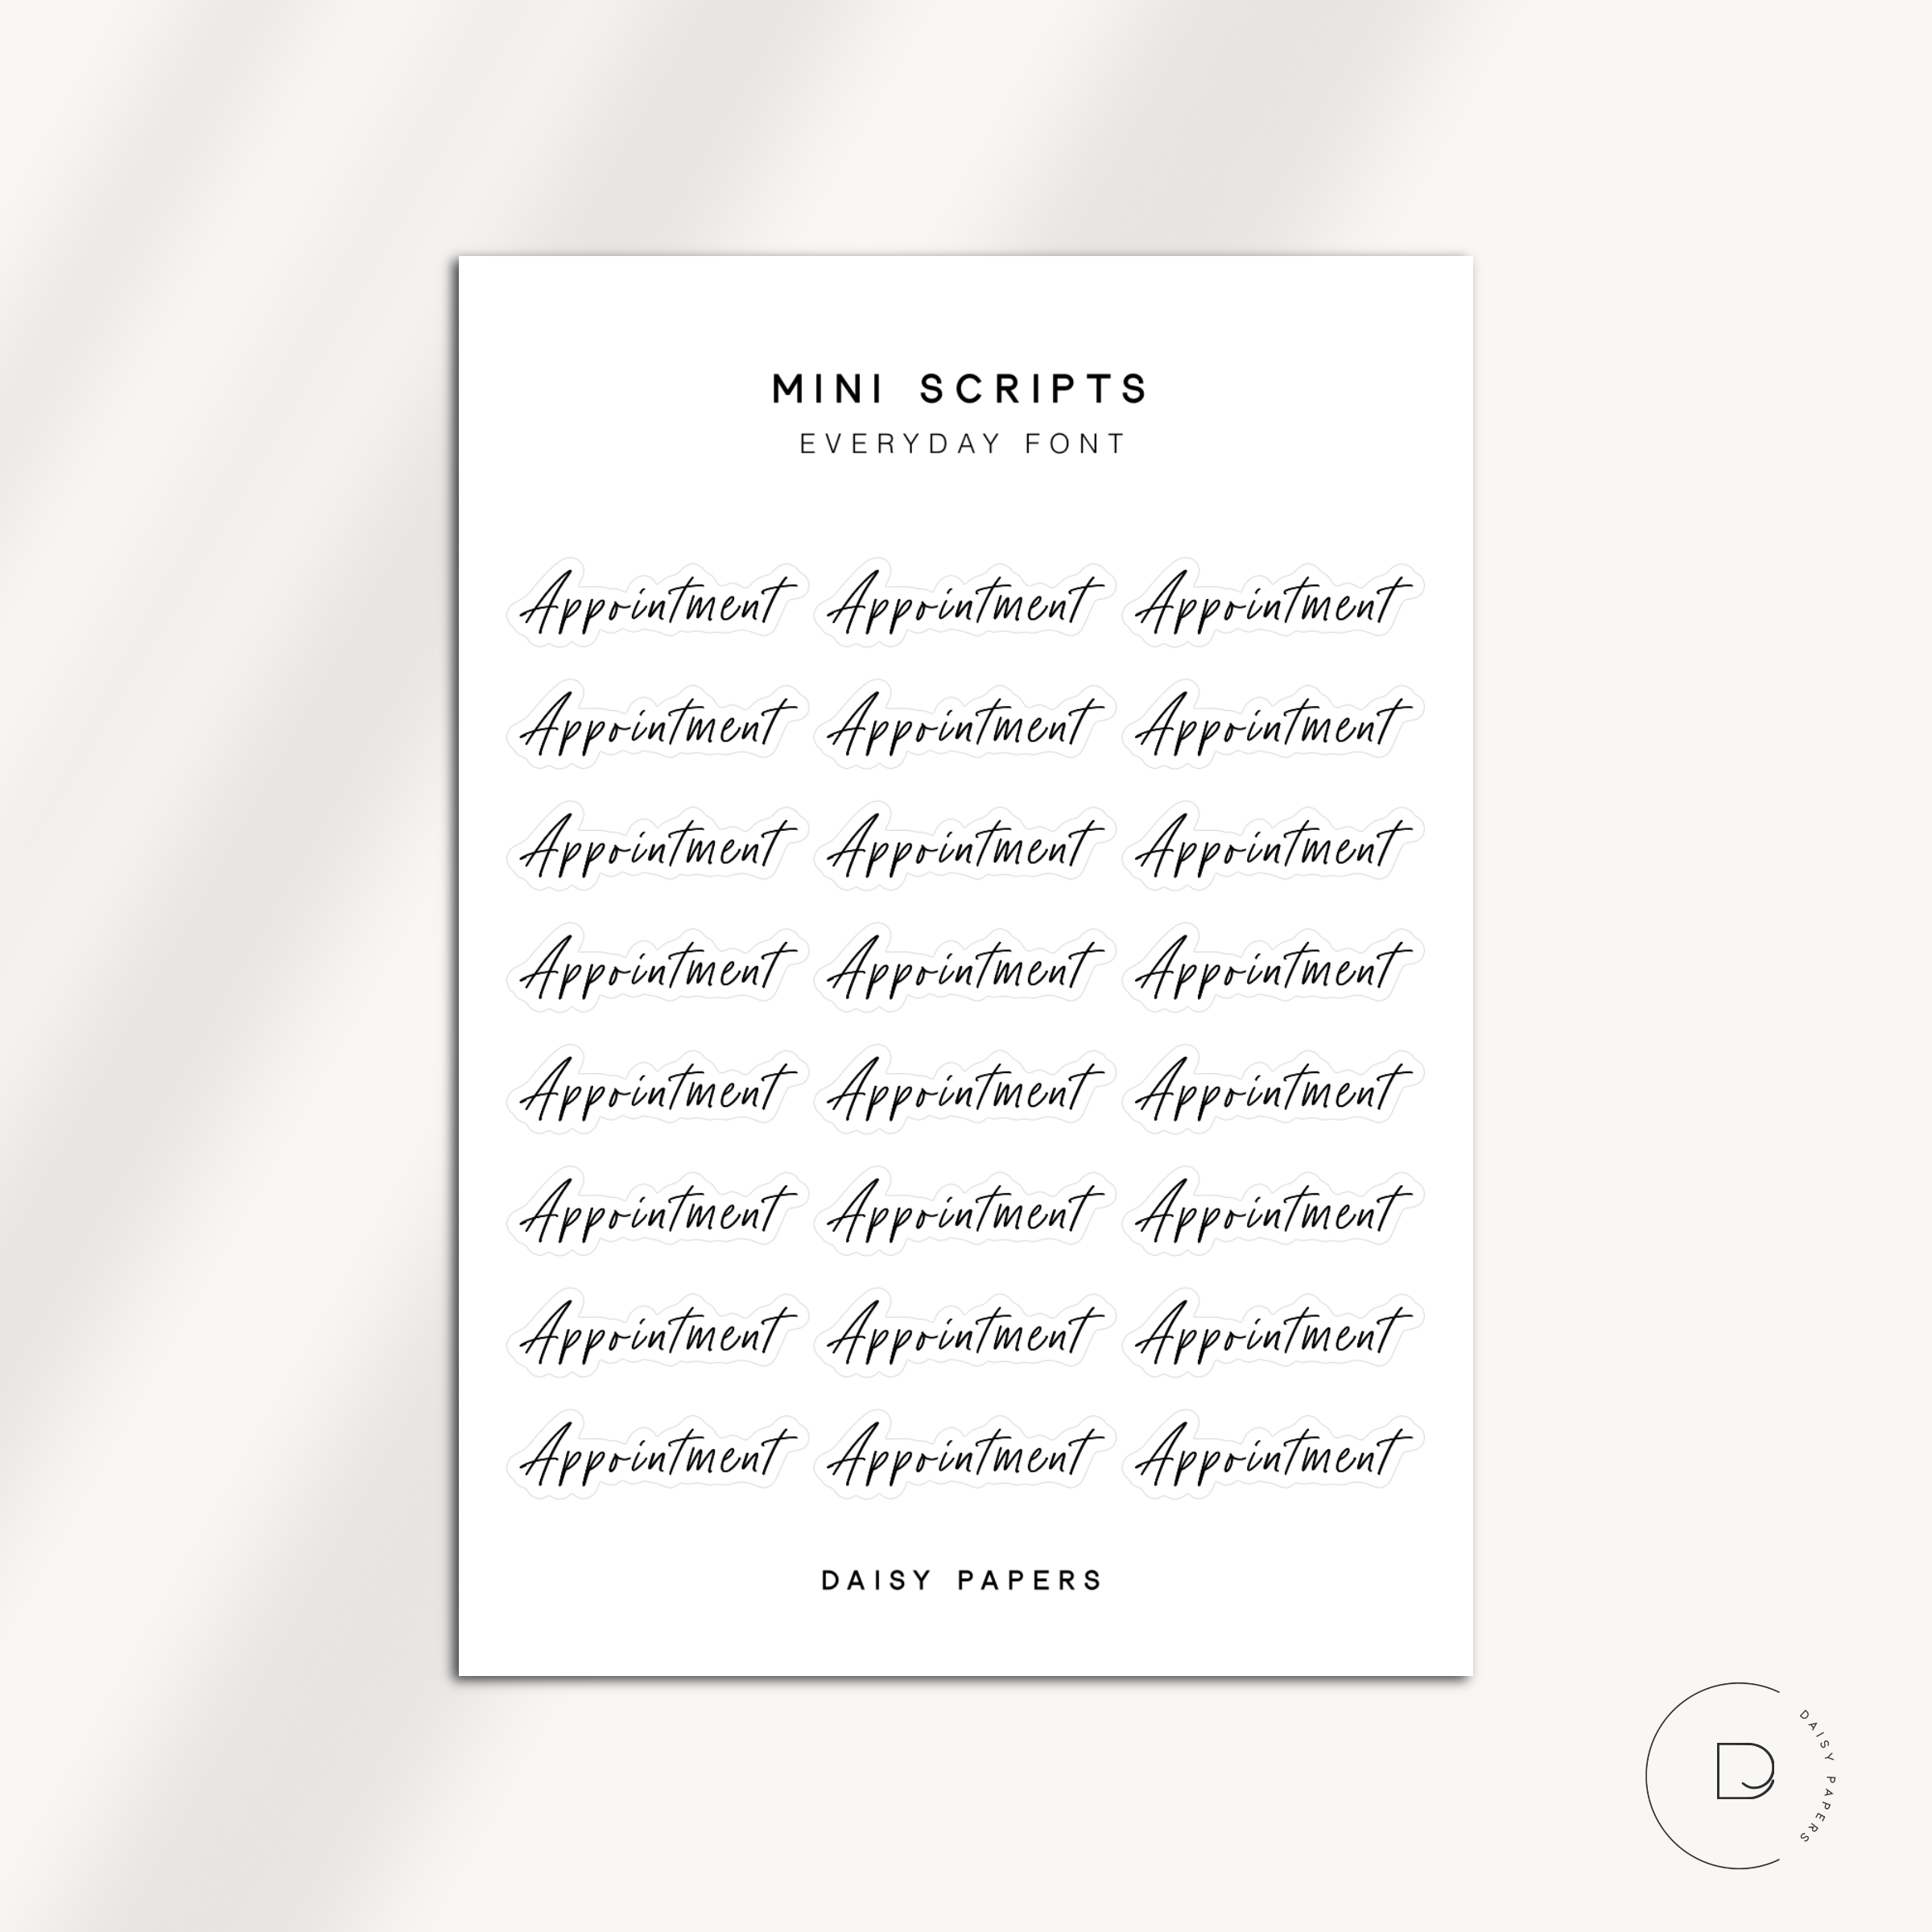 MINI SCRIPTS | EVERYDAY FONT - APPOINTMENT